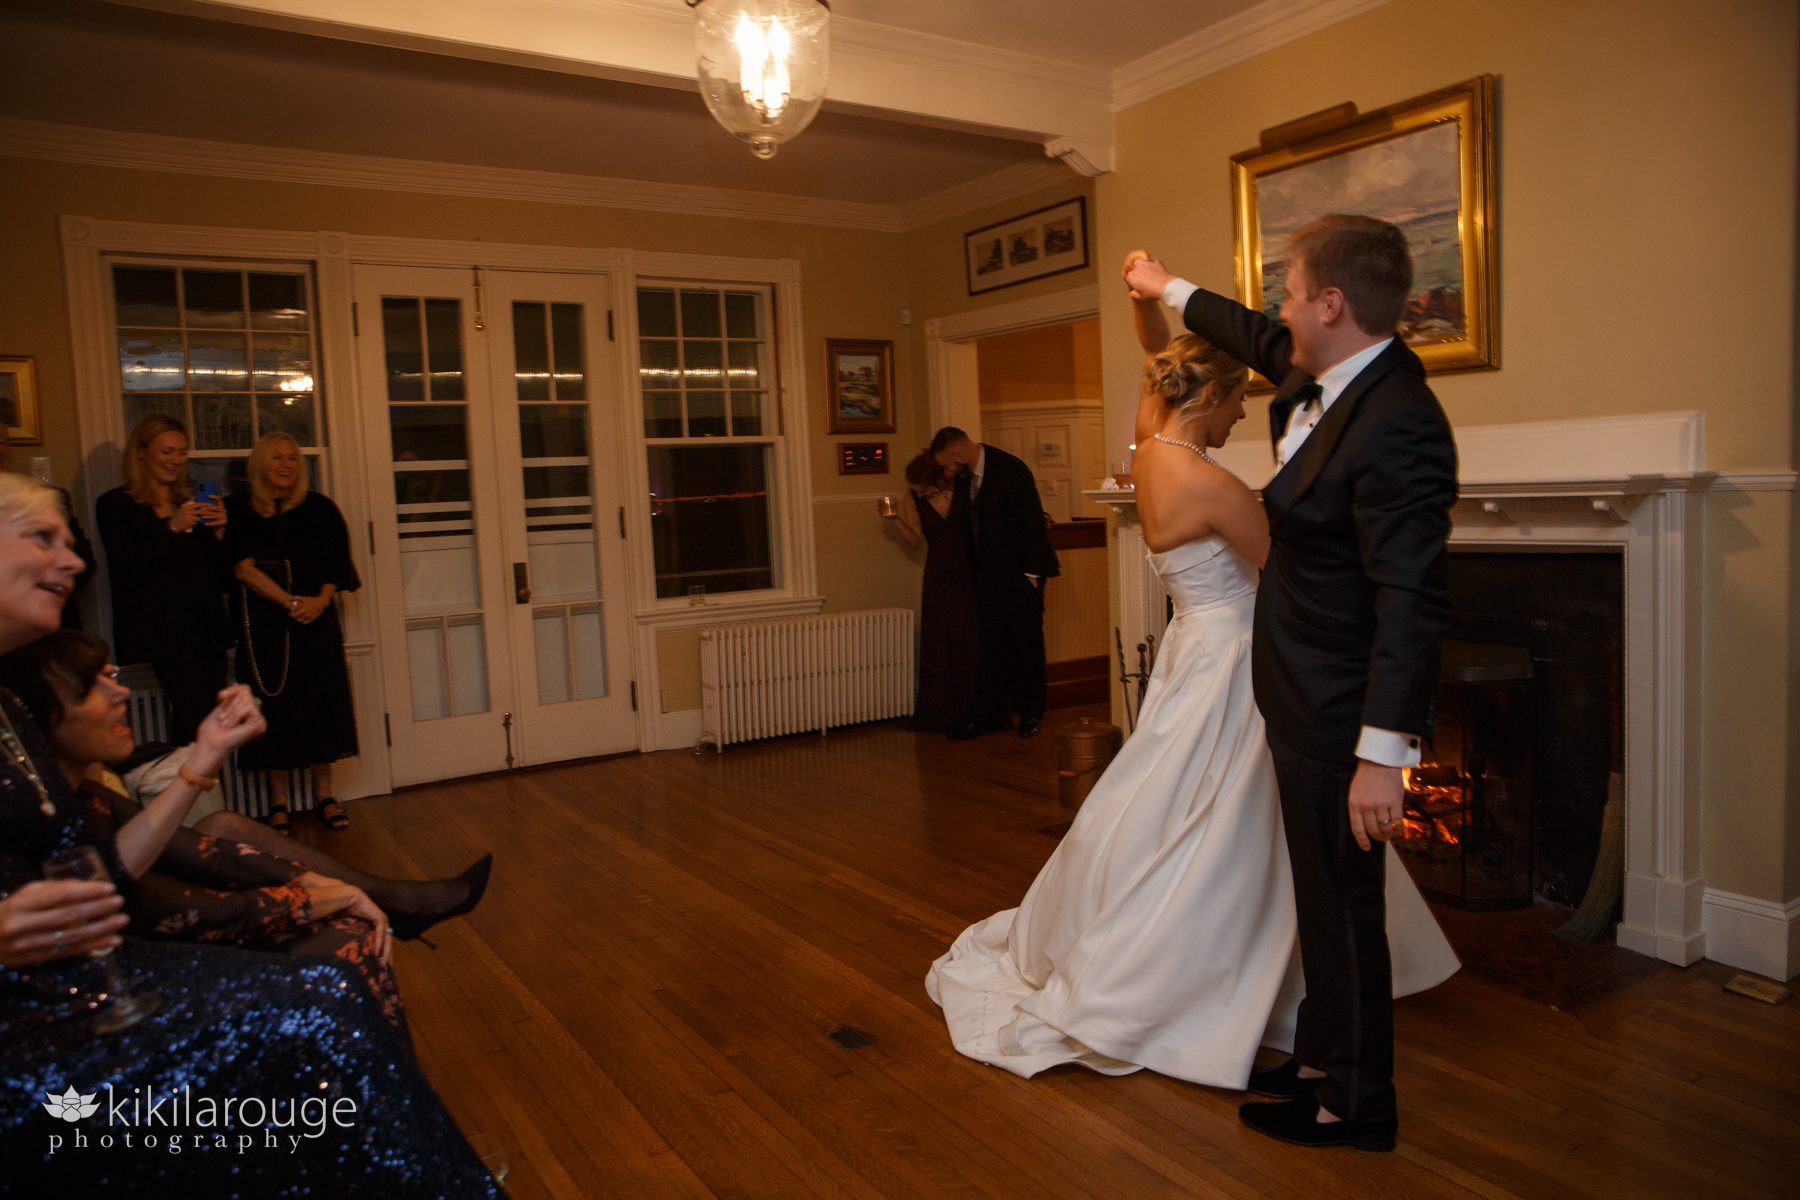 Wedding couple first dance twirling bride